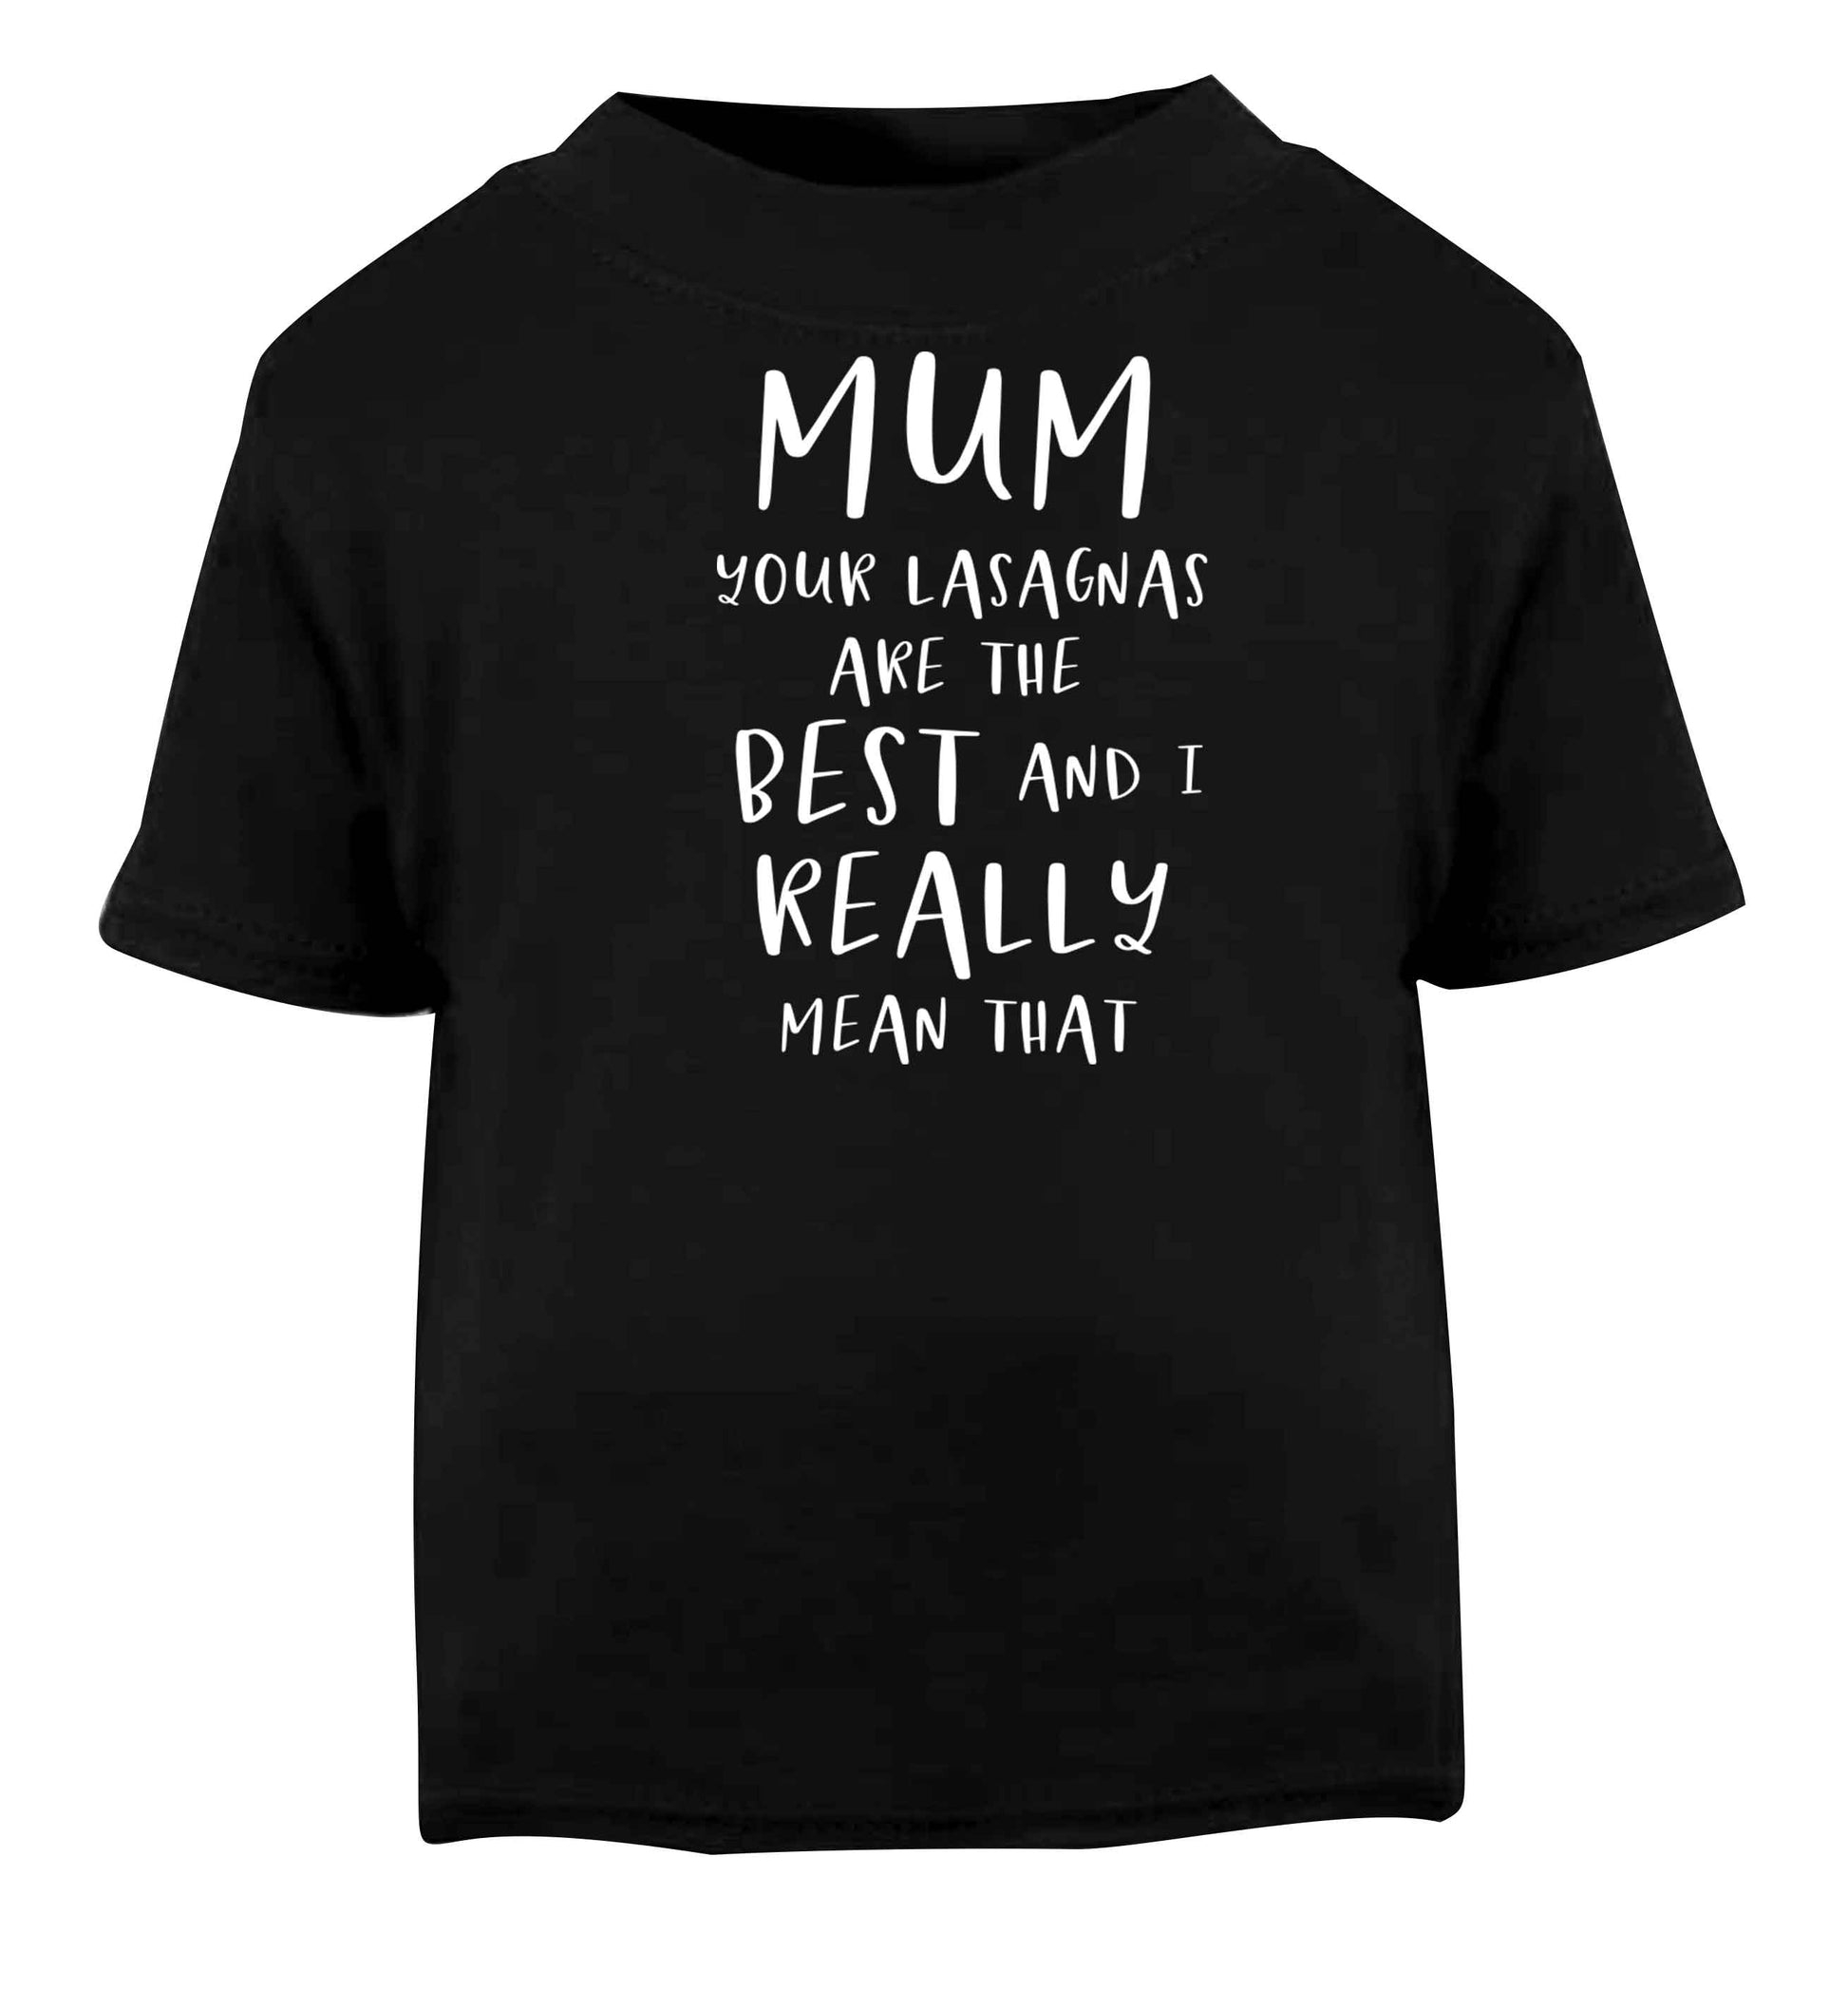 Funny gifts for your mum on mother's dayor her birthday! Mum your lasagnas are the best and I really mean that Black baby toddler Tshirt 2 years